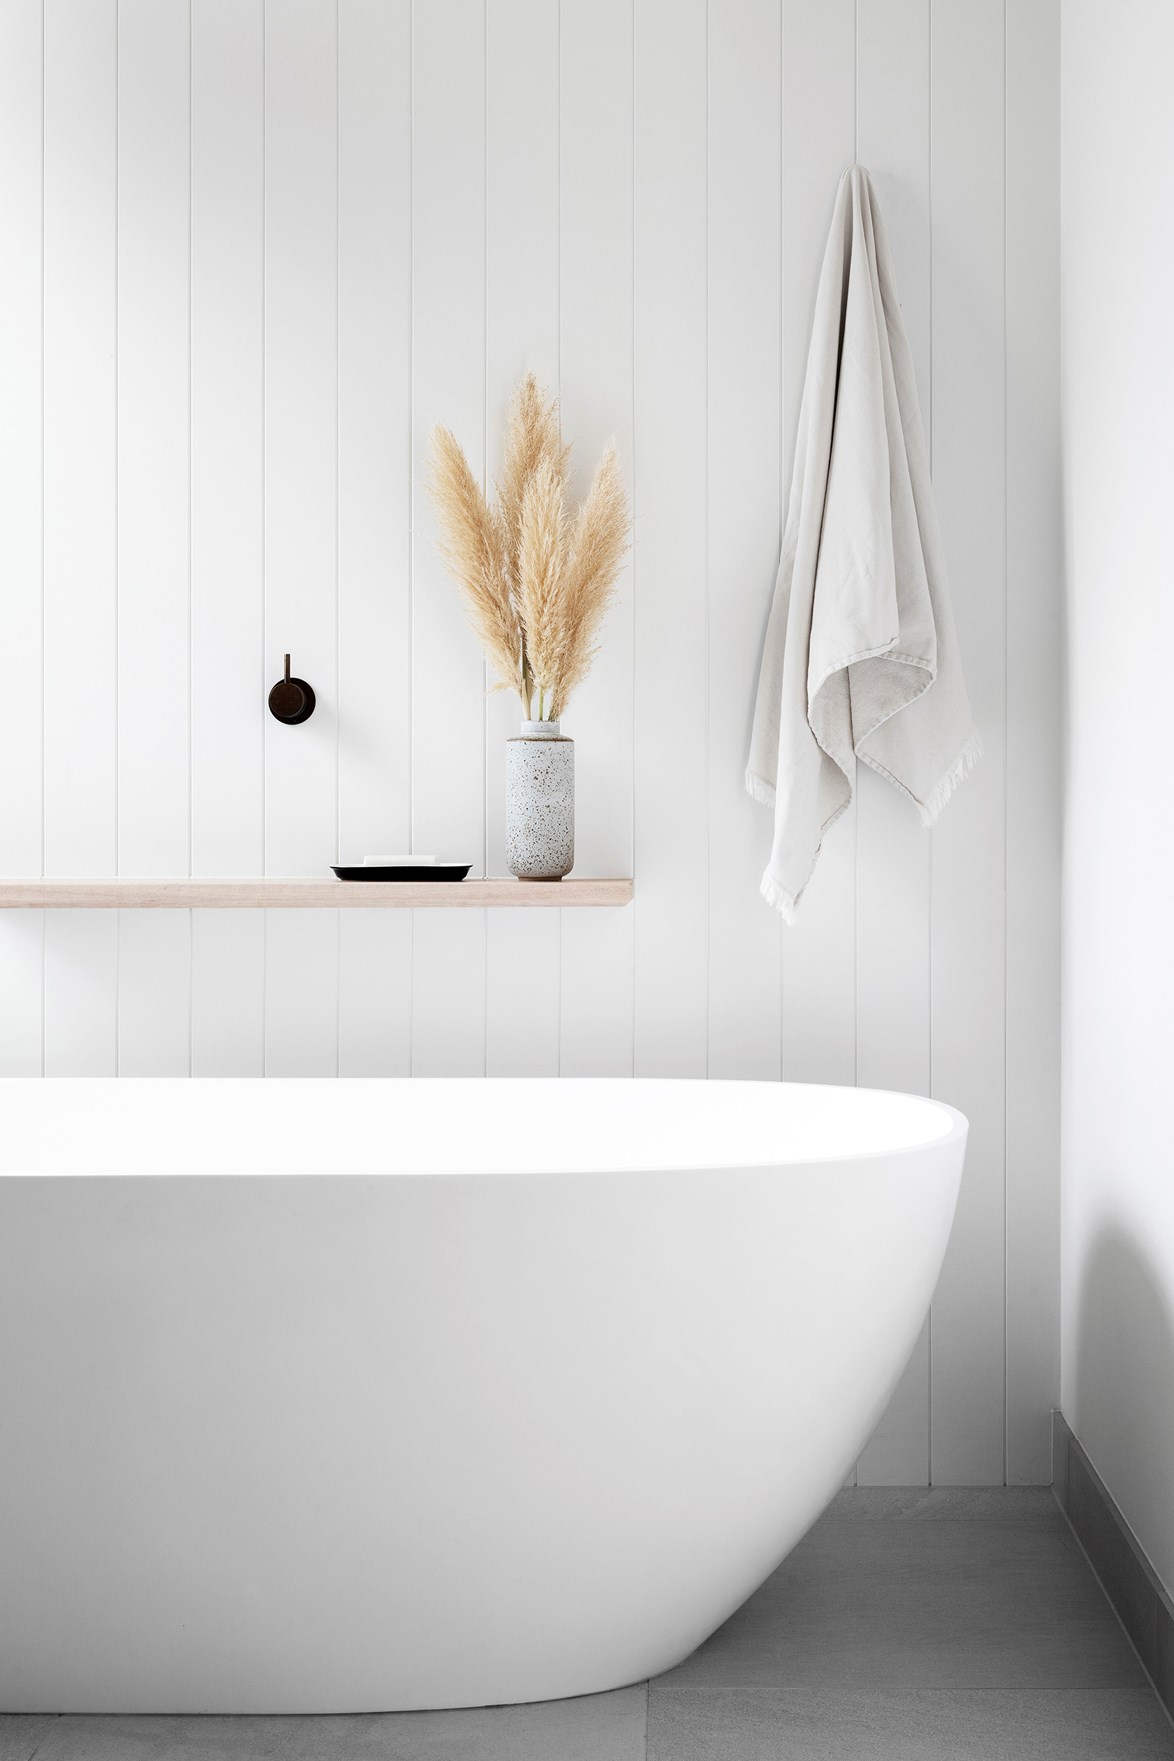 How to make white walls look good in the bathroom depends on working with, not against architectural details as seen in this [Scandinavian style beach house](https://www.homestolove.com.au/scandinavian-style-beach-house-20995|target="_blank").